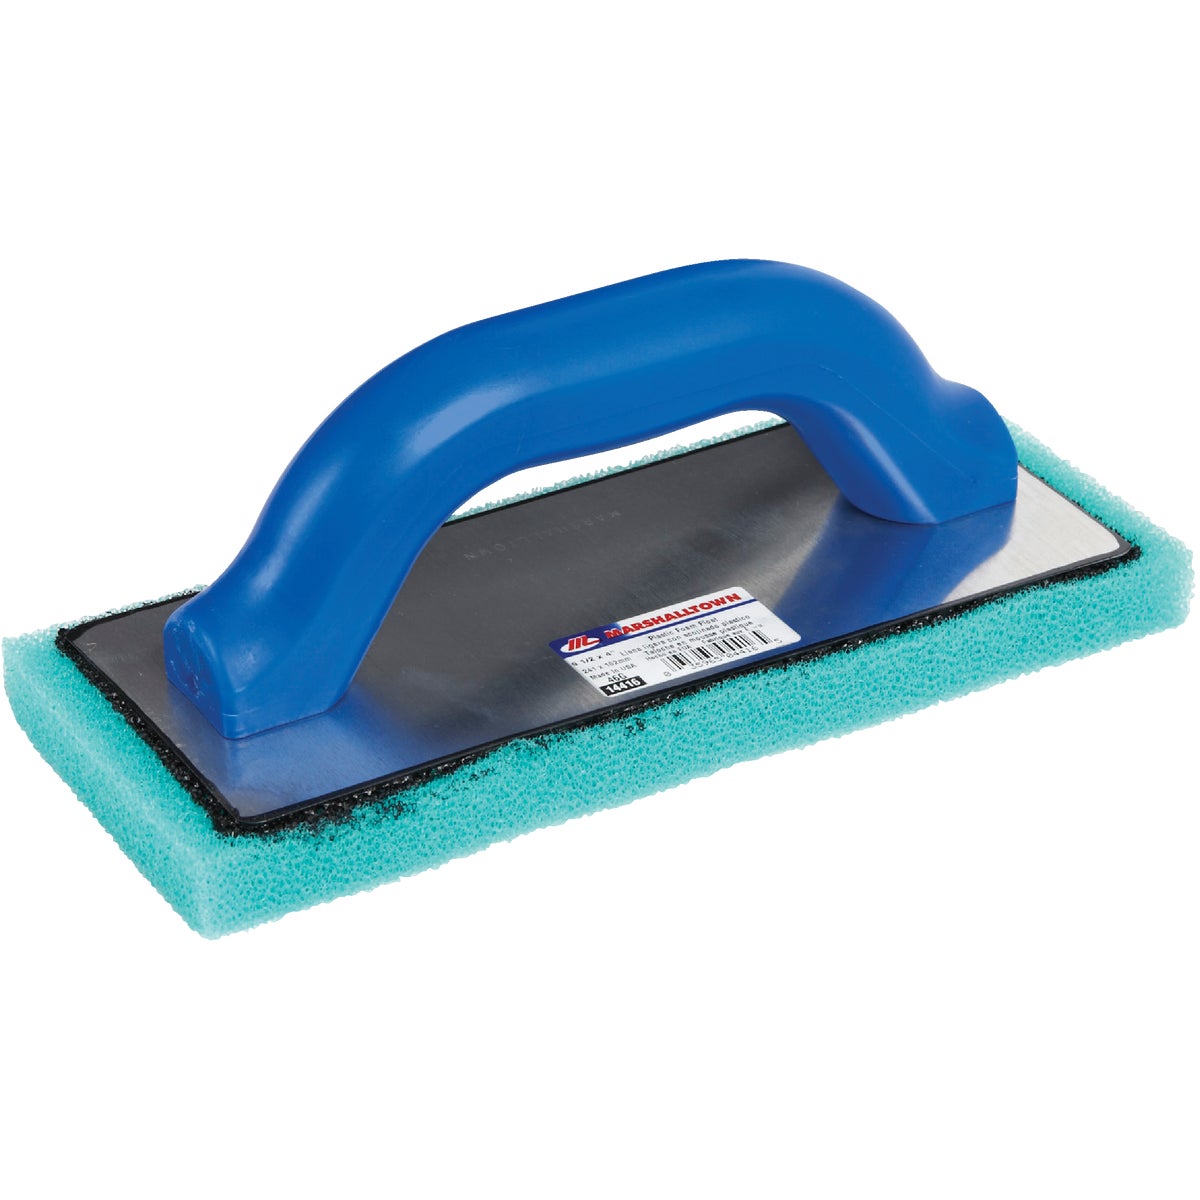 Item 337919, Float featuring a fine cell plastic foam pad specially bonded to aluminum 